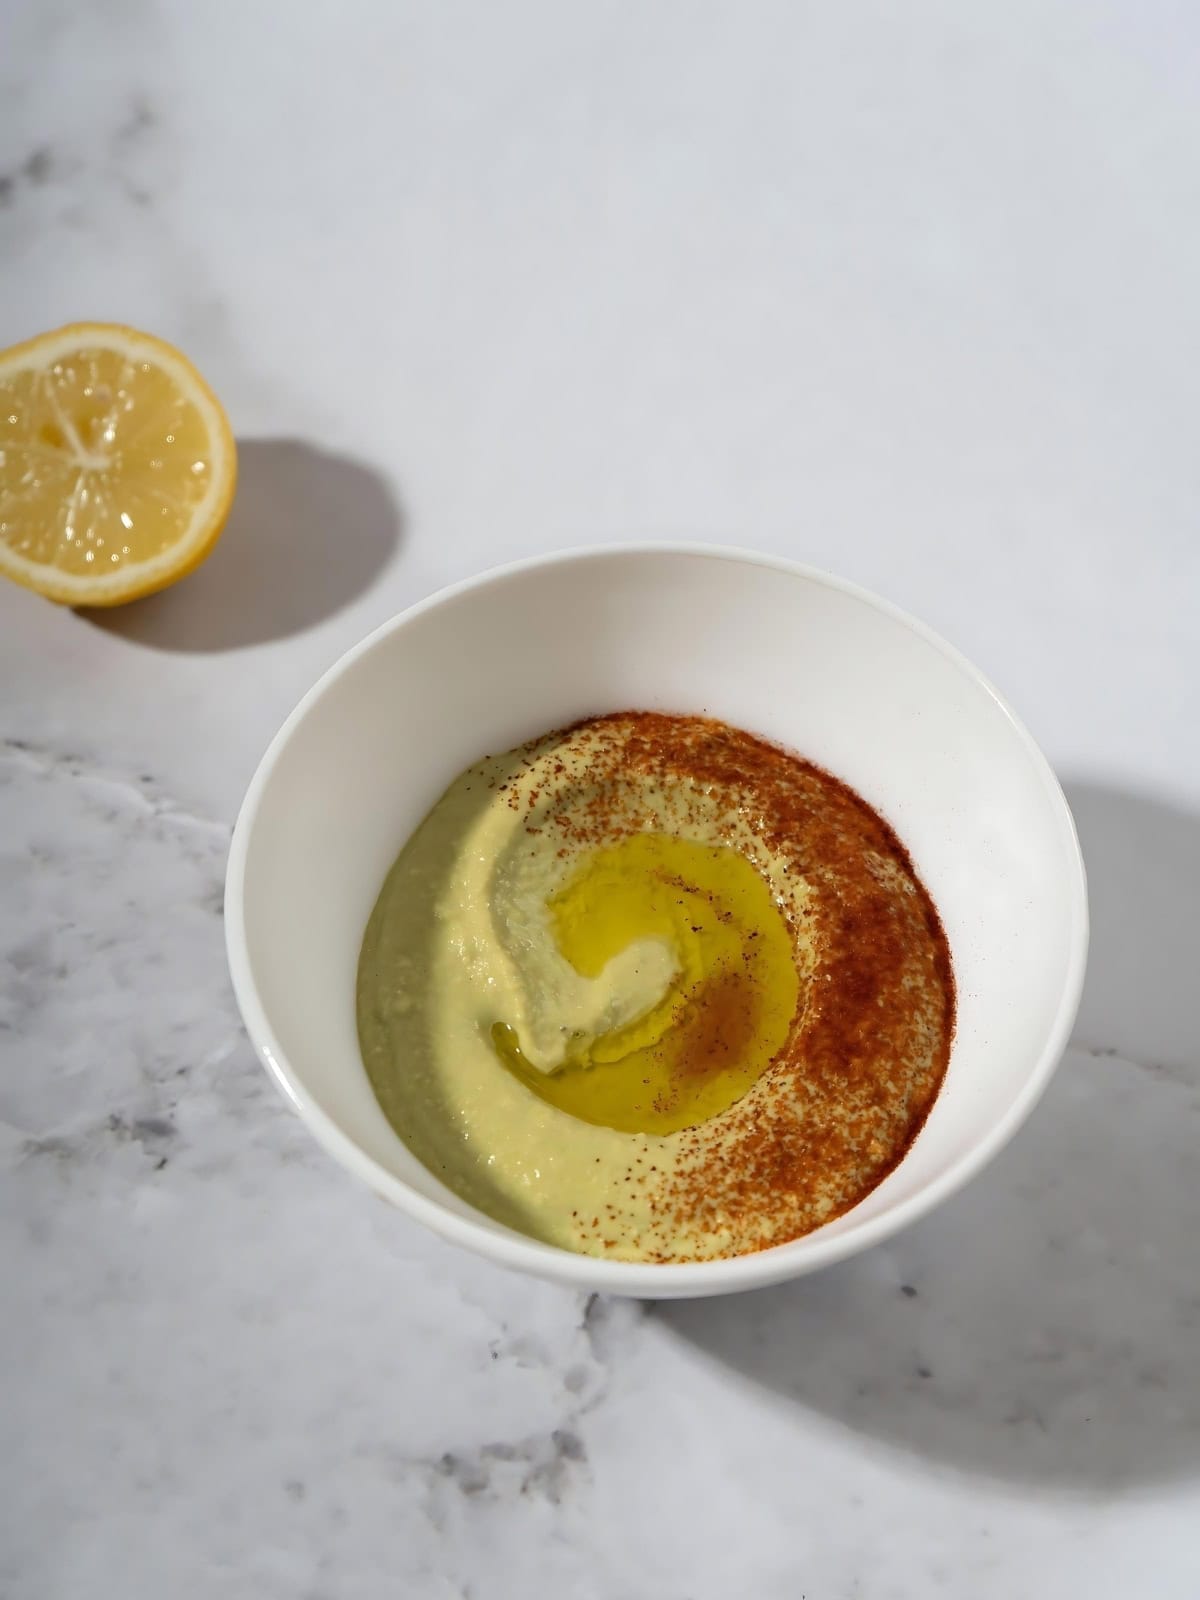 Fava bean hummus topped with paprika and olive oil next to a sliced lemon.